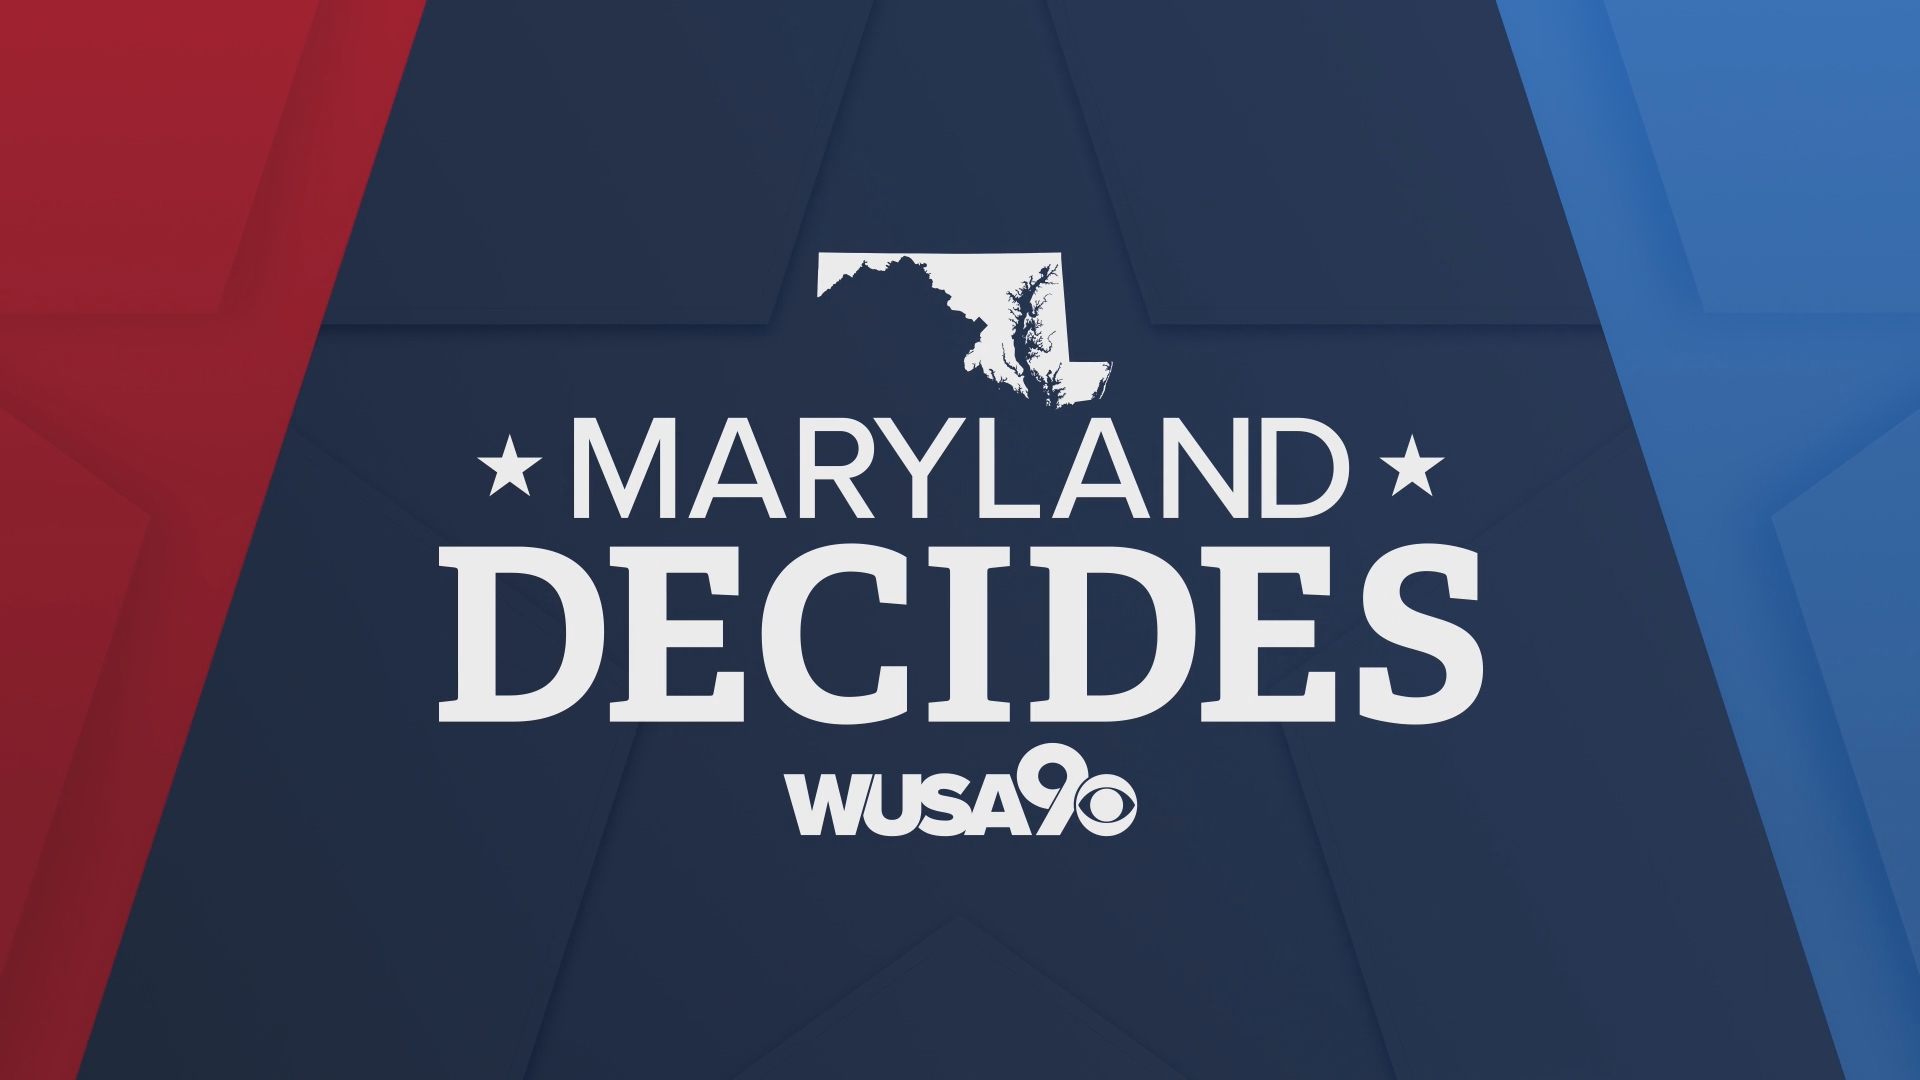 Maryland voters head to the polls Tuesday to decide on some key primary races.